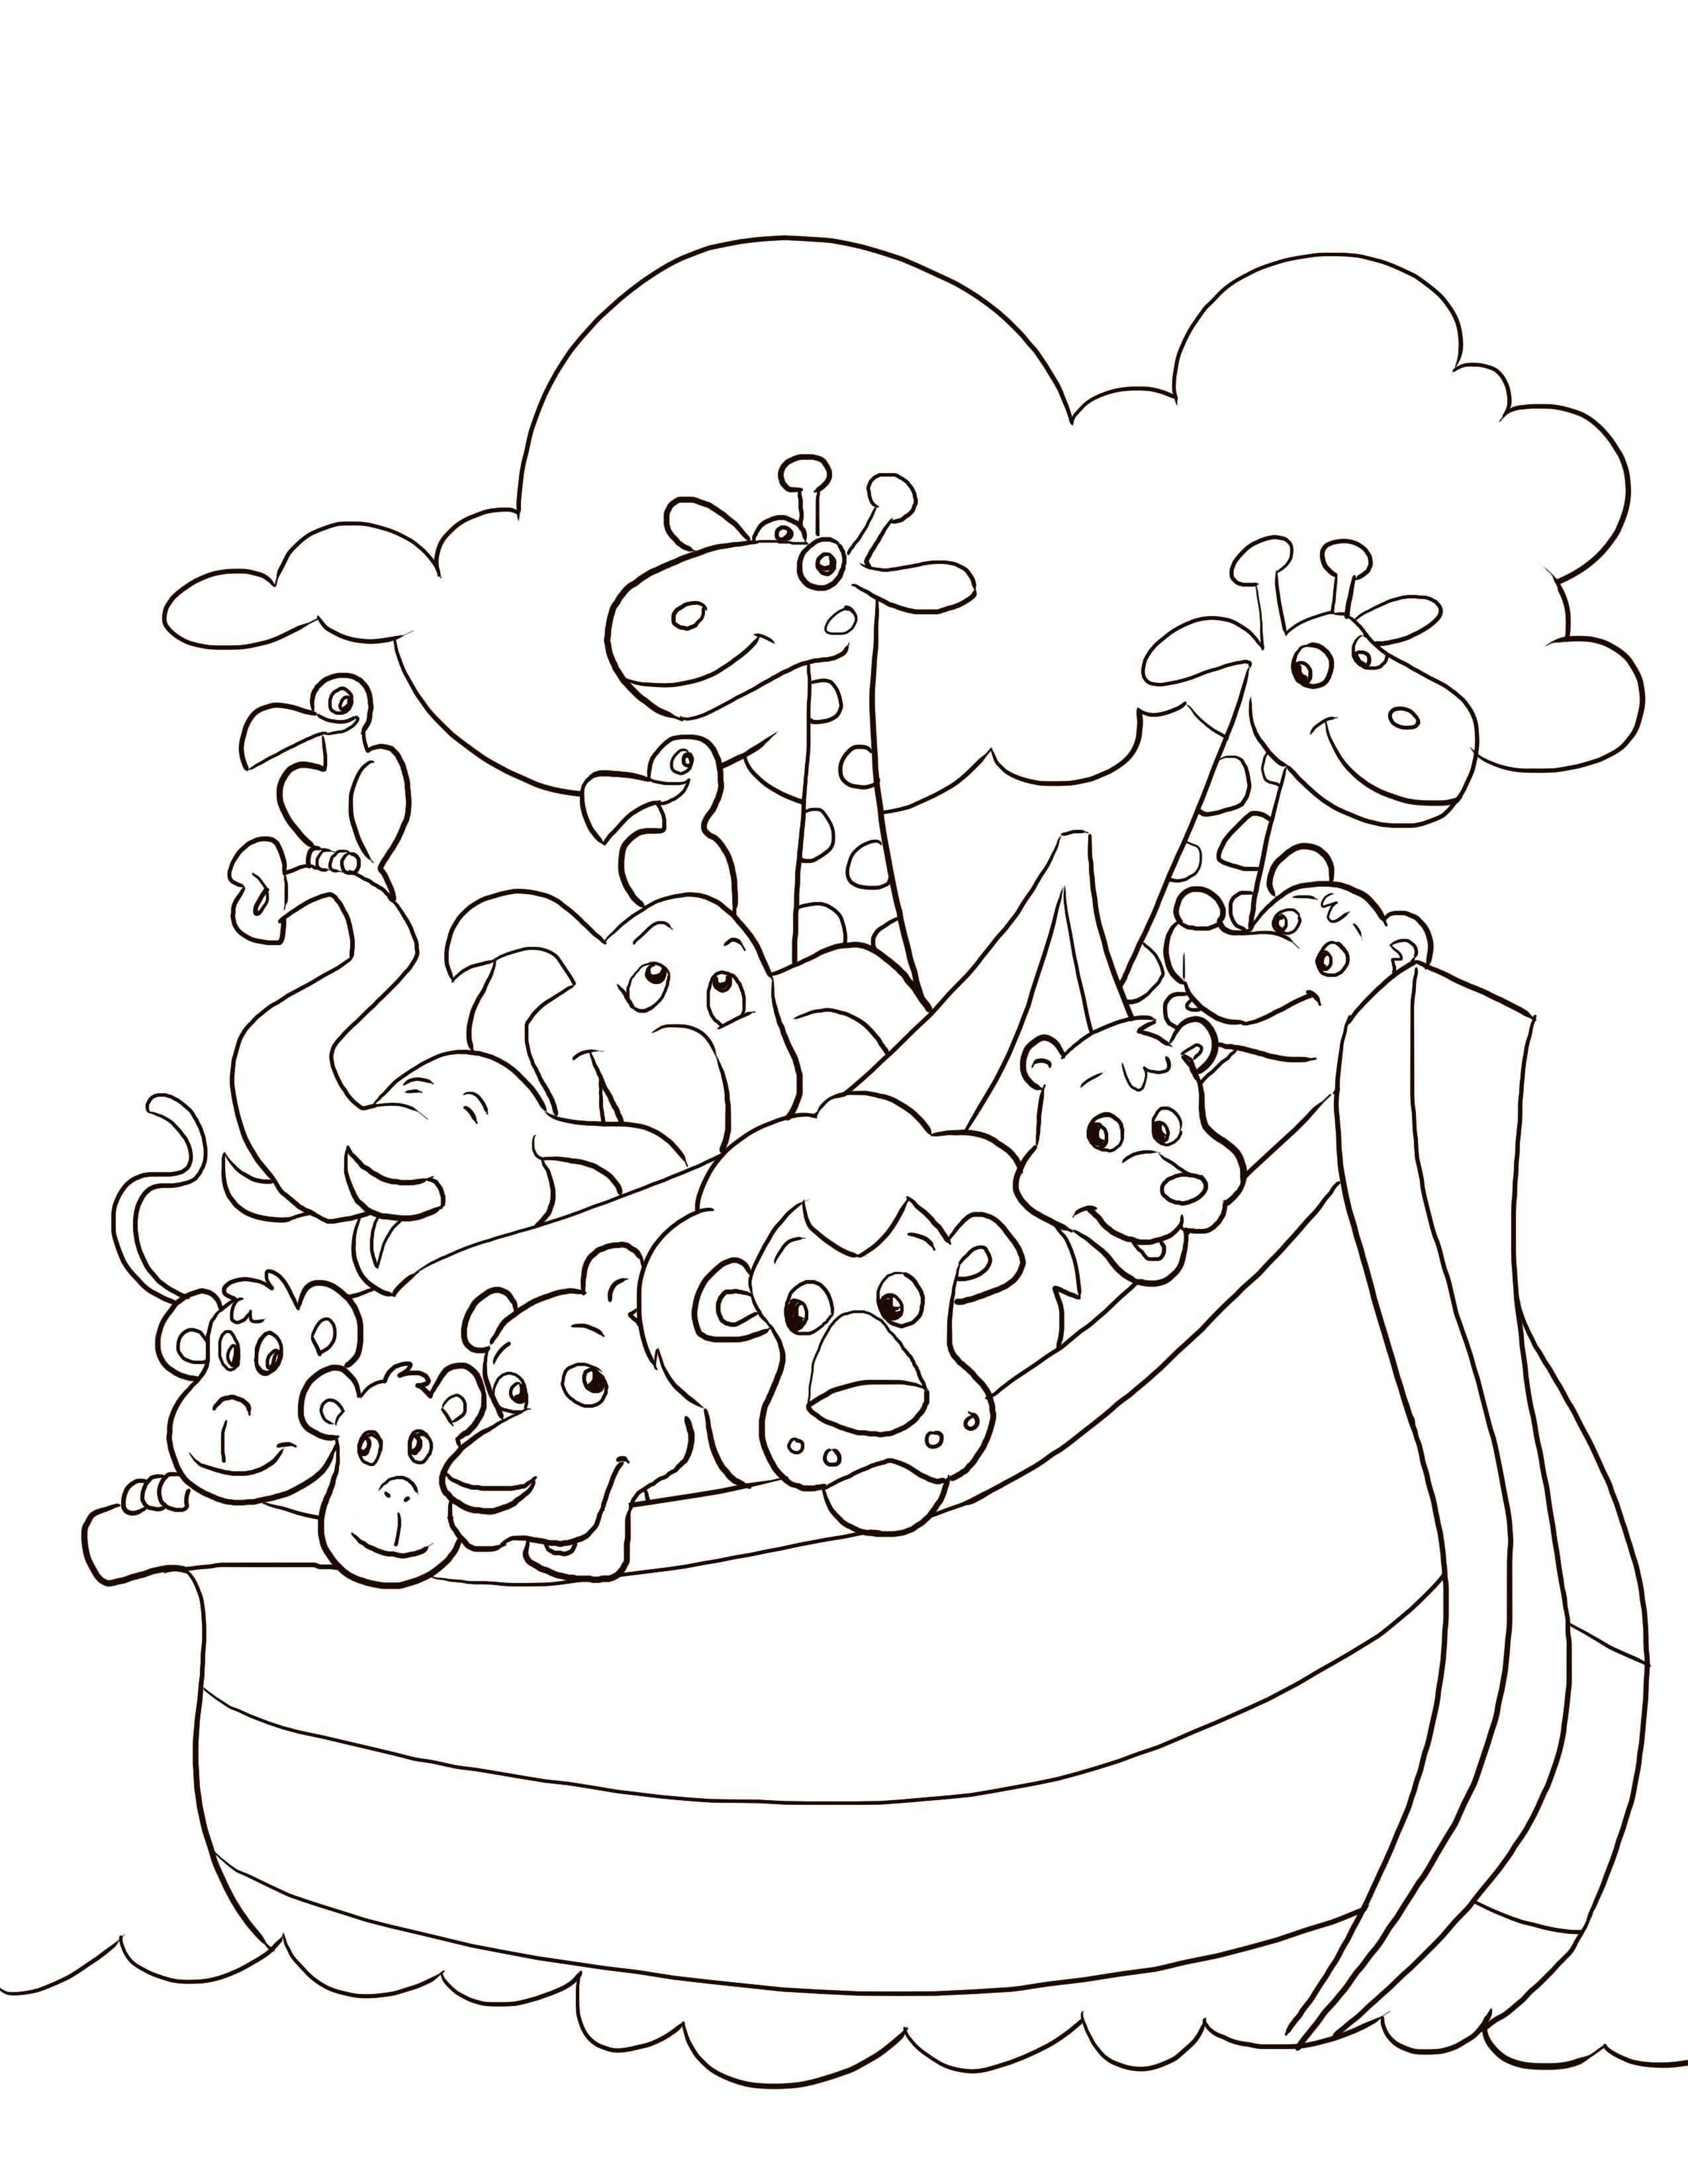 Noah S Ark Coloring Page Bible Coloring Pages Sunday School Coloring Pages Christian